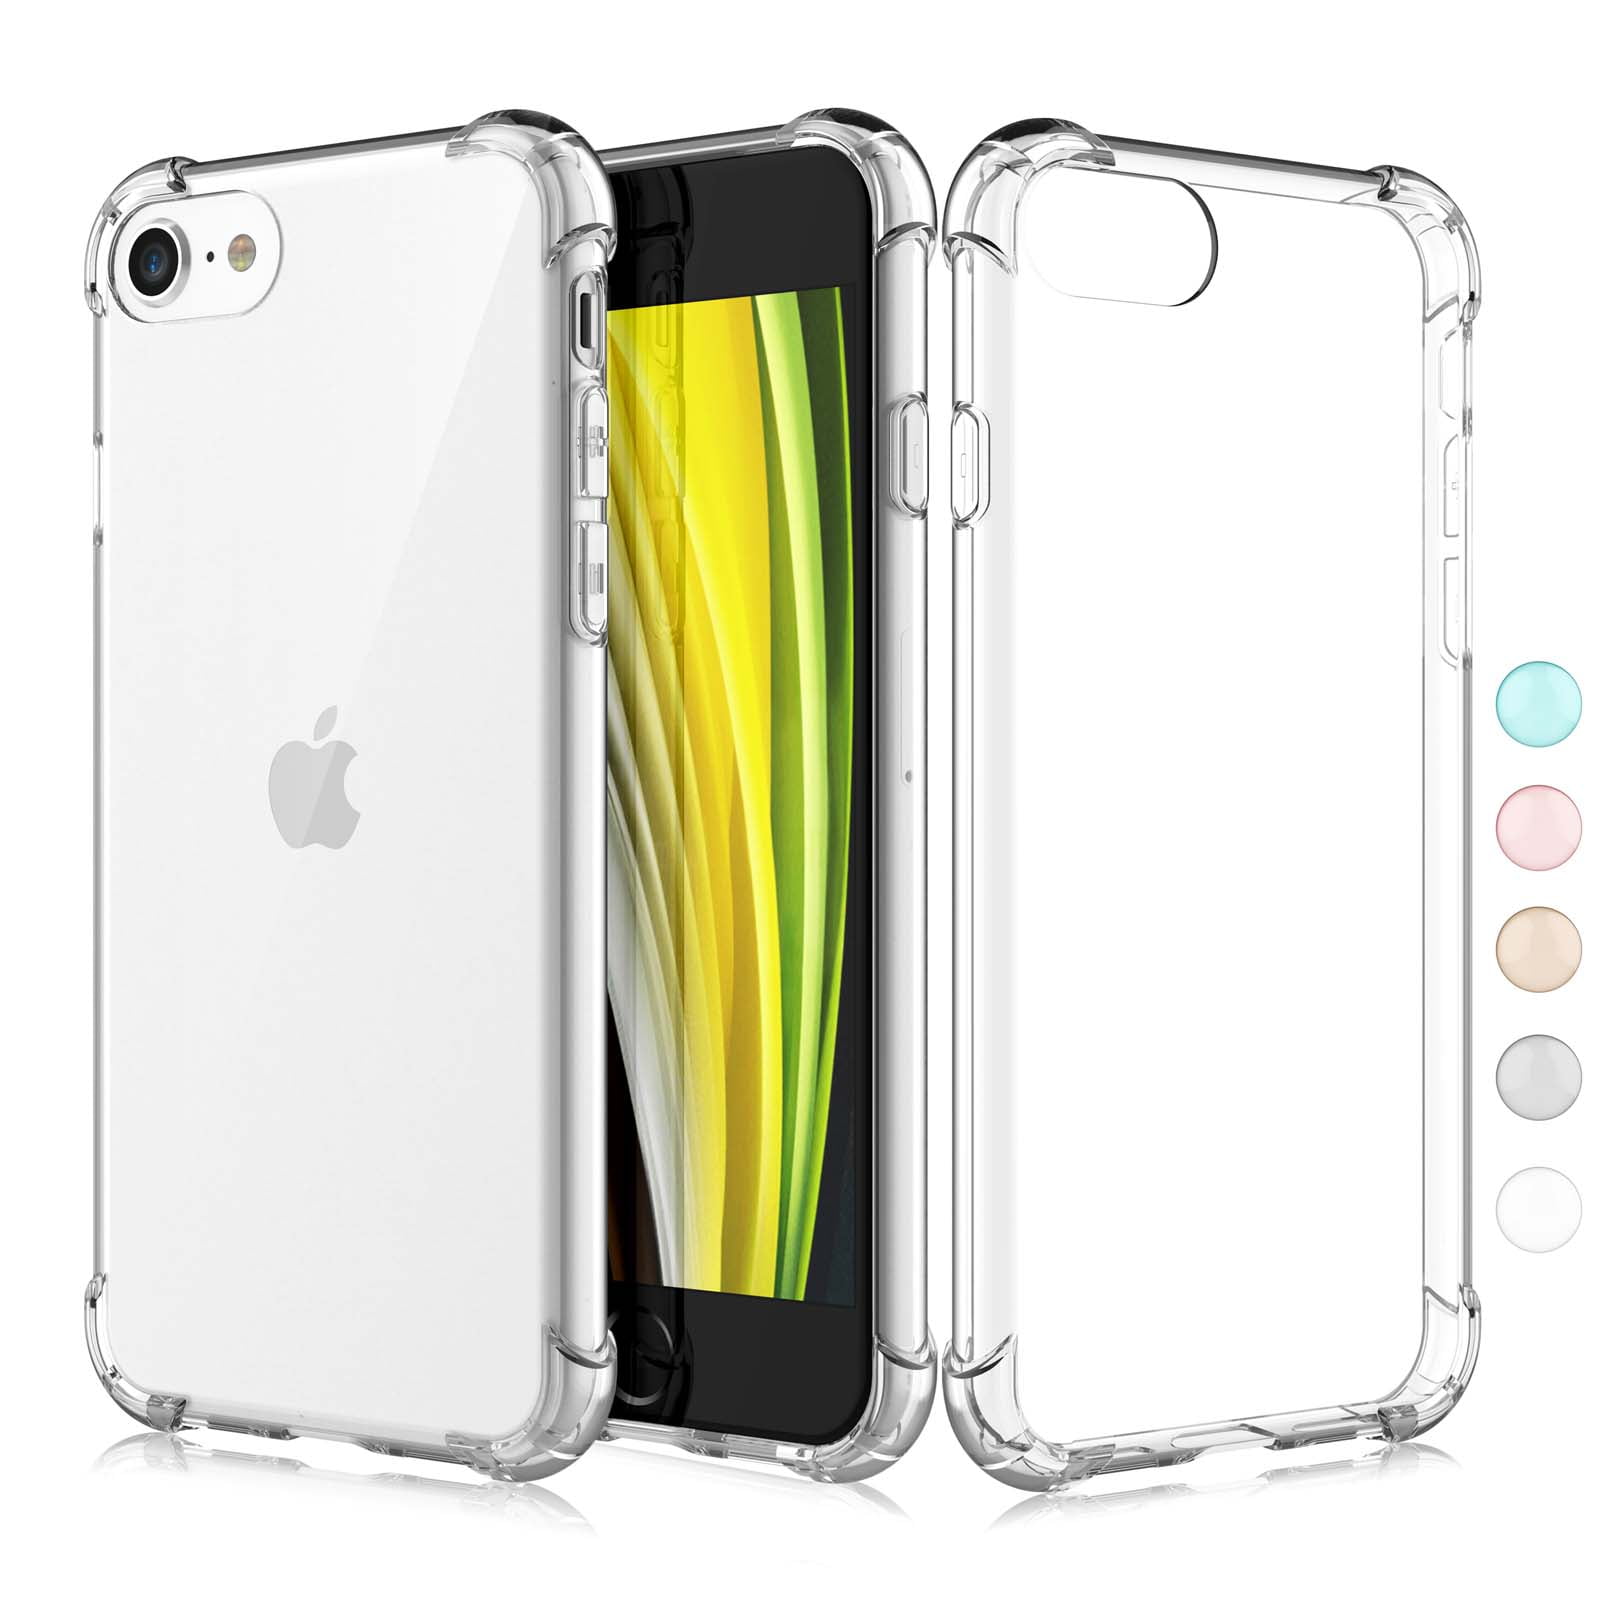 Anti-Yellow Ultra Slim Thin Soft Silicone Fully Protective Phone Cover Case for iPhone SE2/7/8-Clear TORRAS Crystal Clear Case for iPhone SE 2020 Case X-SHOCK Absorber iPhone 7/8 Case